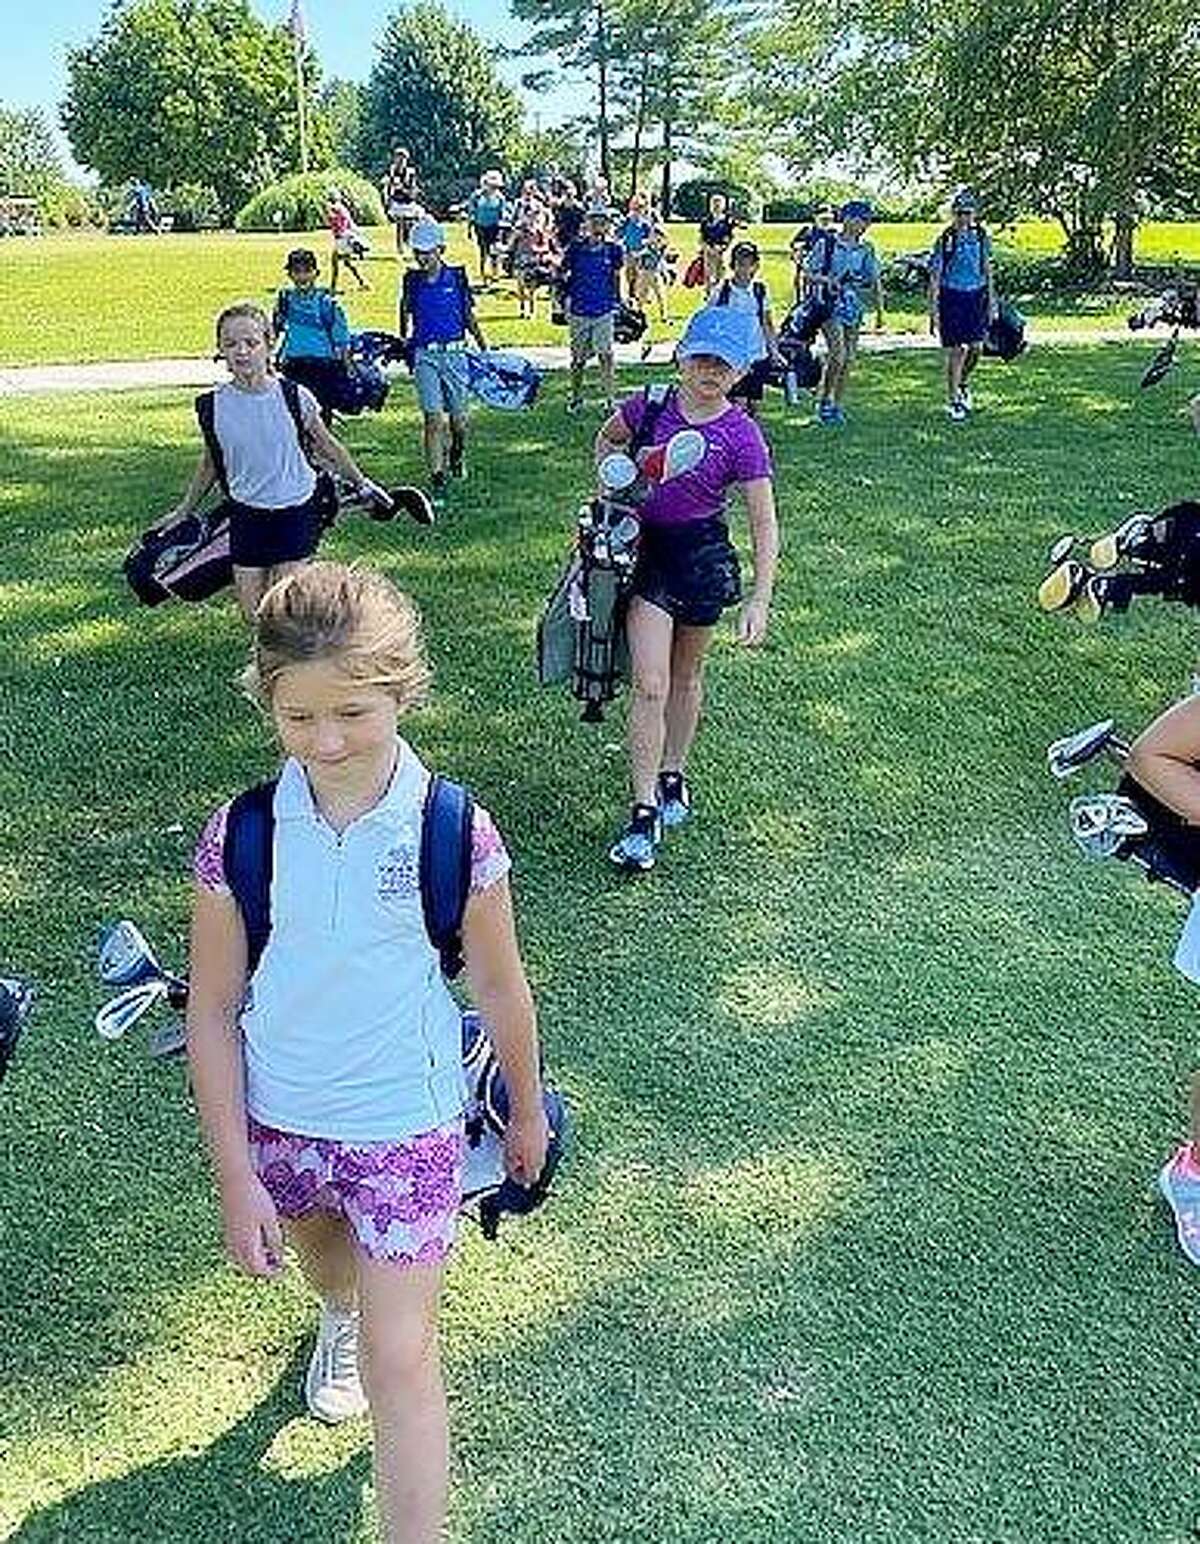 Golfers from the PGA Junior League during a practice session last year at Sunset Hills Country Club.